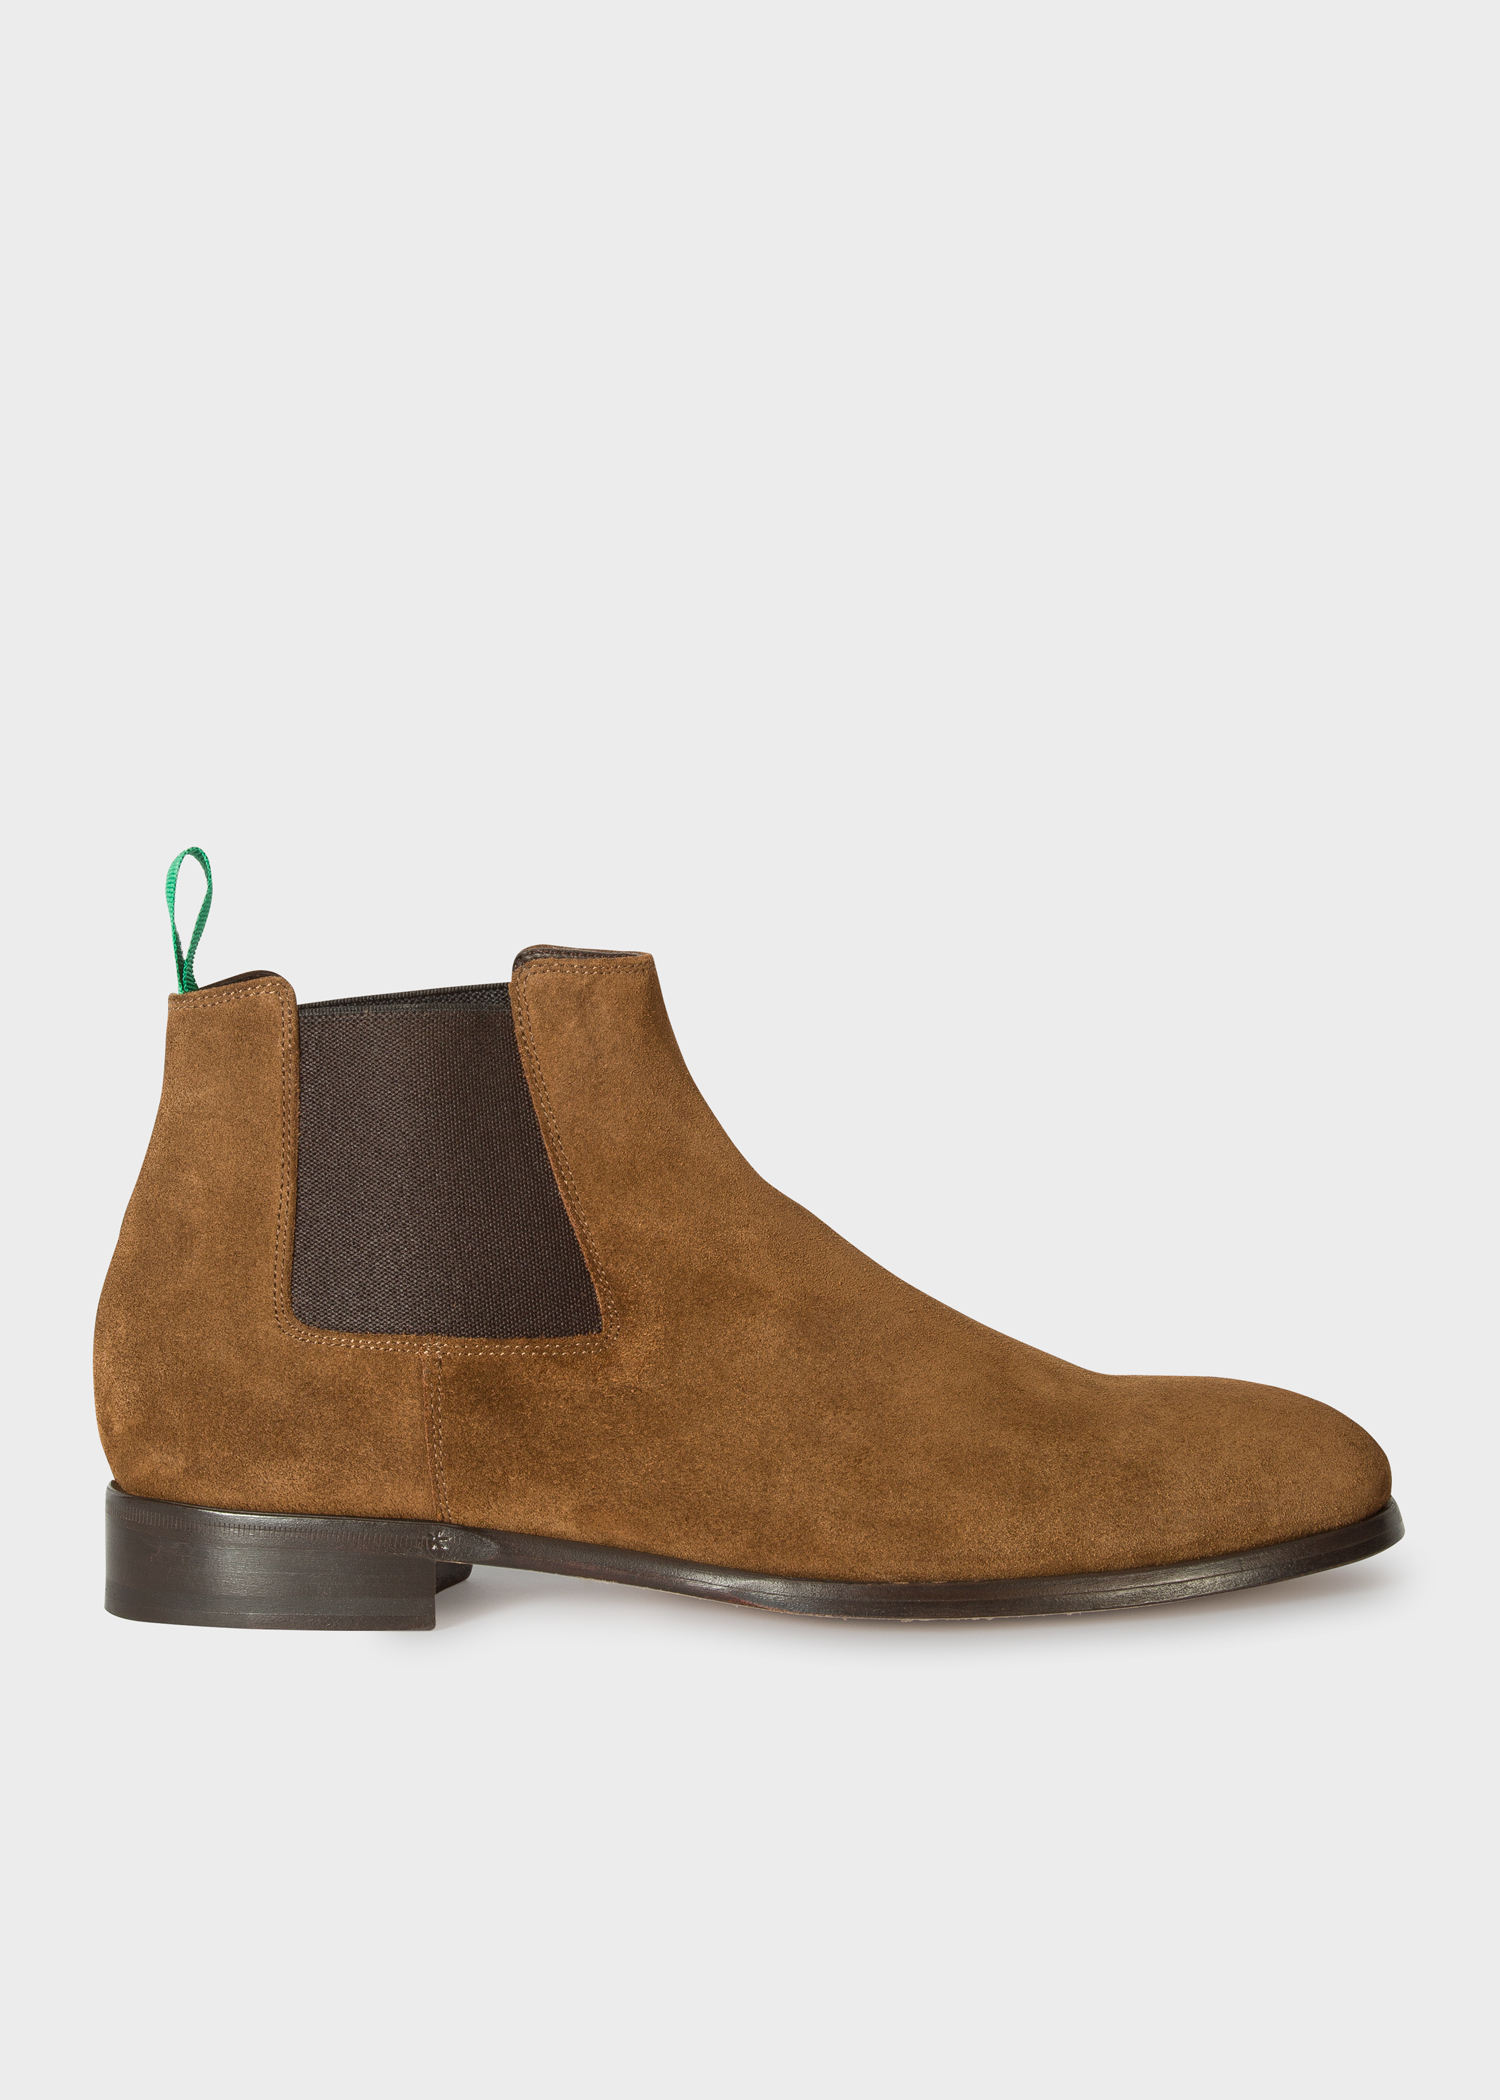 Angreb ulykke Fremmed Men's Tan Suede 'Crown' Chelsea Boots